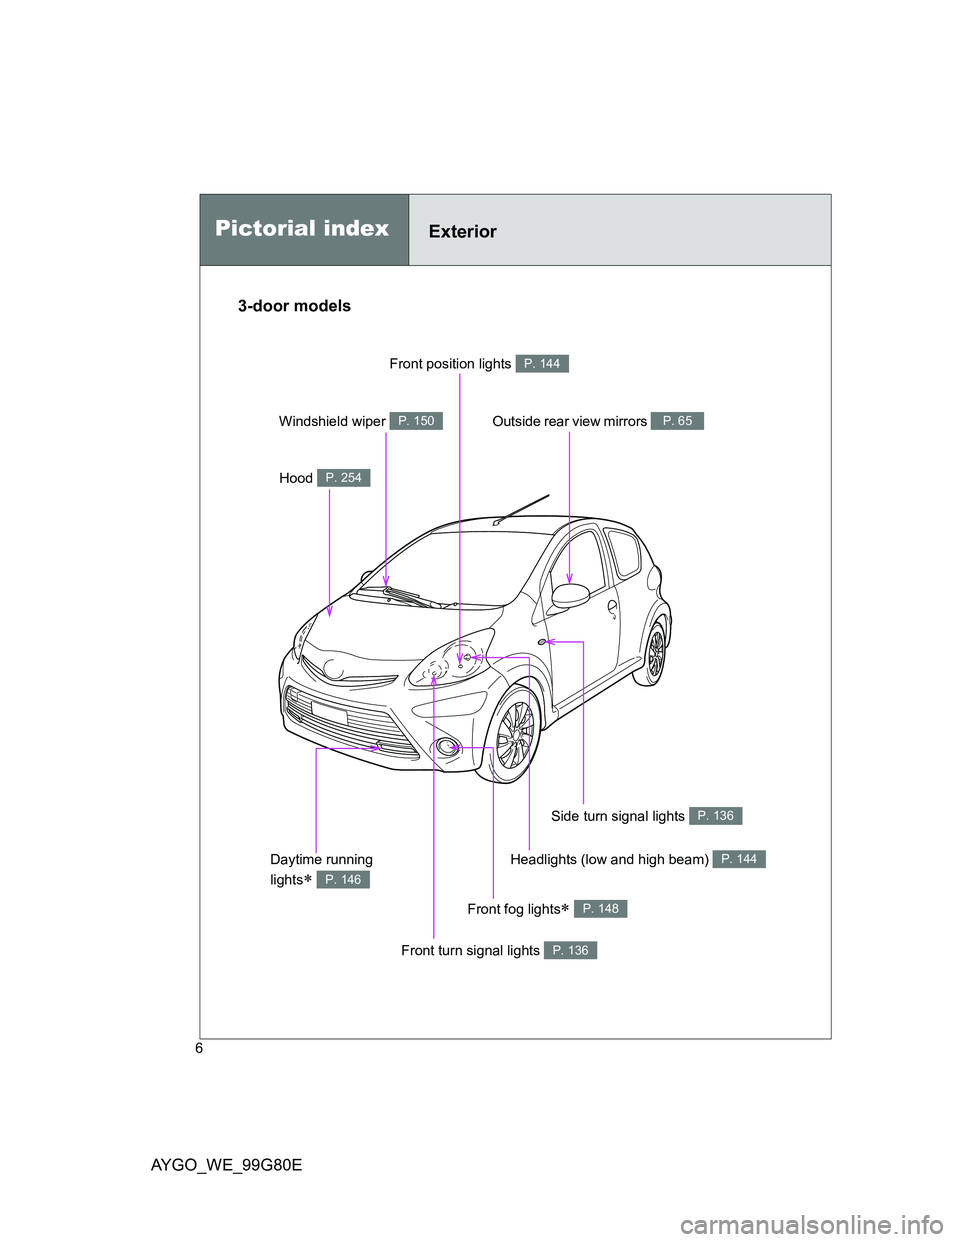 TOYOTA AYGO 2014  Owners Manual (in English) AYGO_WE_99G80E
6
Front fog lights P. 148
Pictorial indexExterior
Front turn signal lights P. 136
Side turn signal lights P. 136
Outside rear view mirrors P. 65
Headlights (low and high beam) P. 144